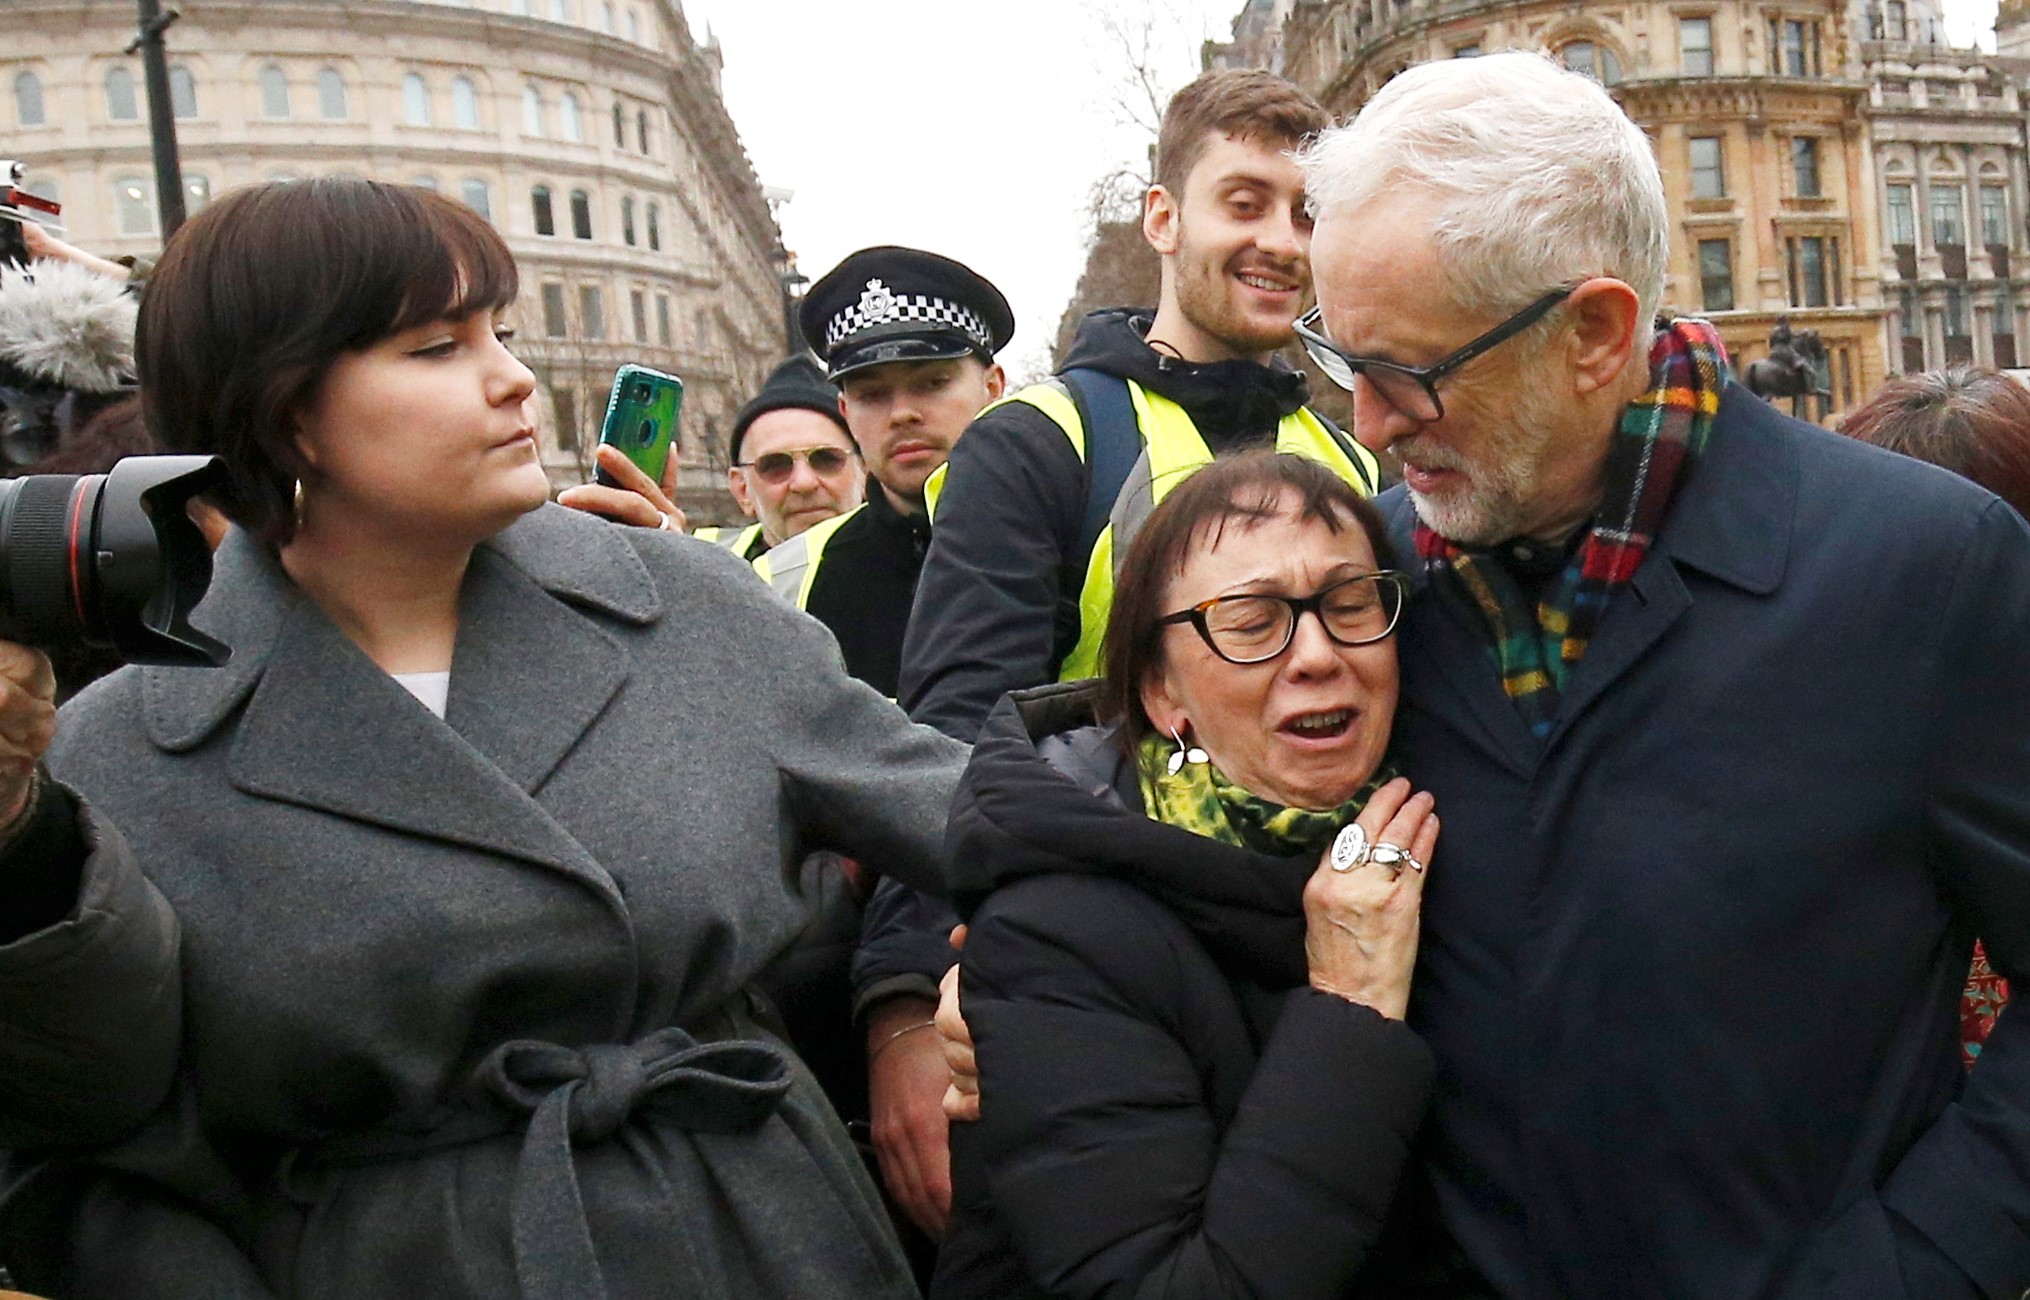 Britain's Labour Party leader Jeremy Corbyn attends a protest to oppose the threat of war with Iran, in London, Britain January 11, 2020